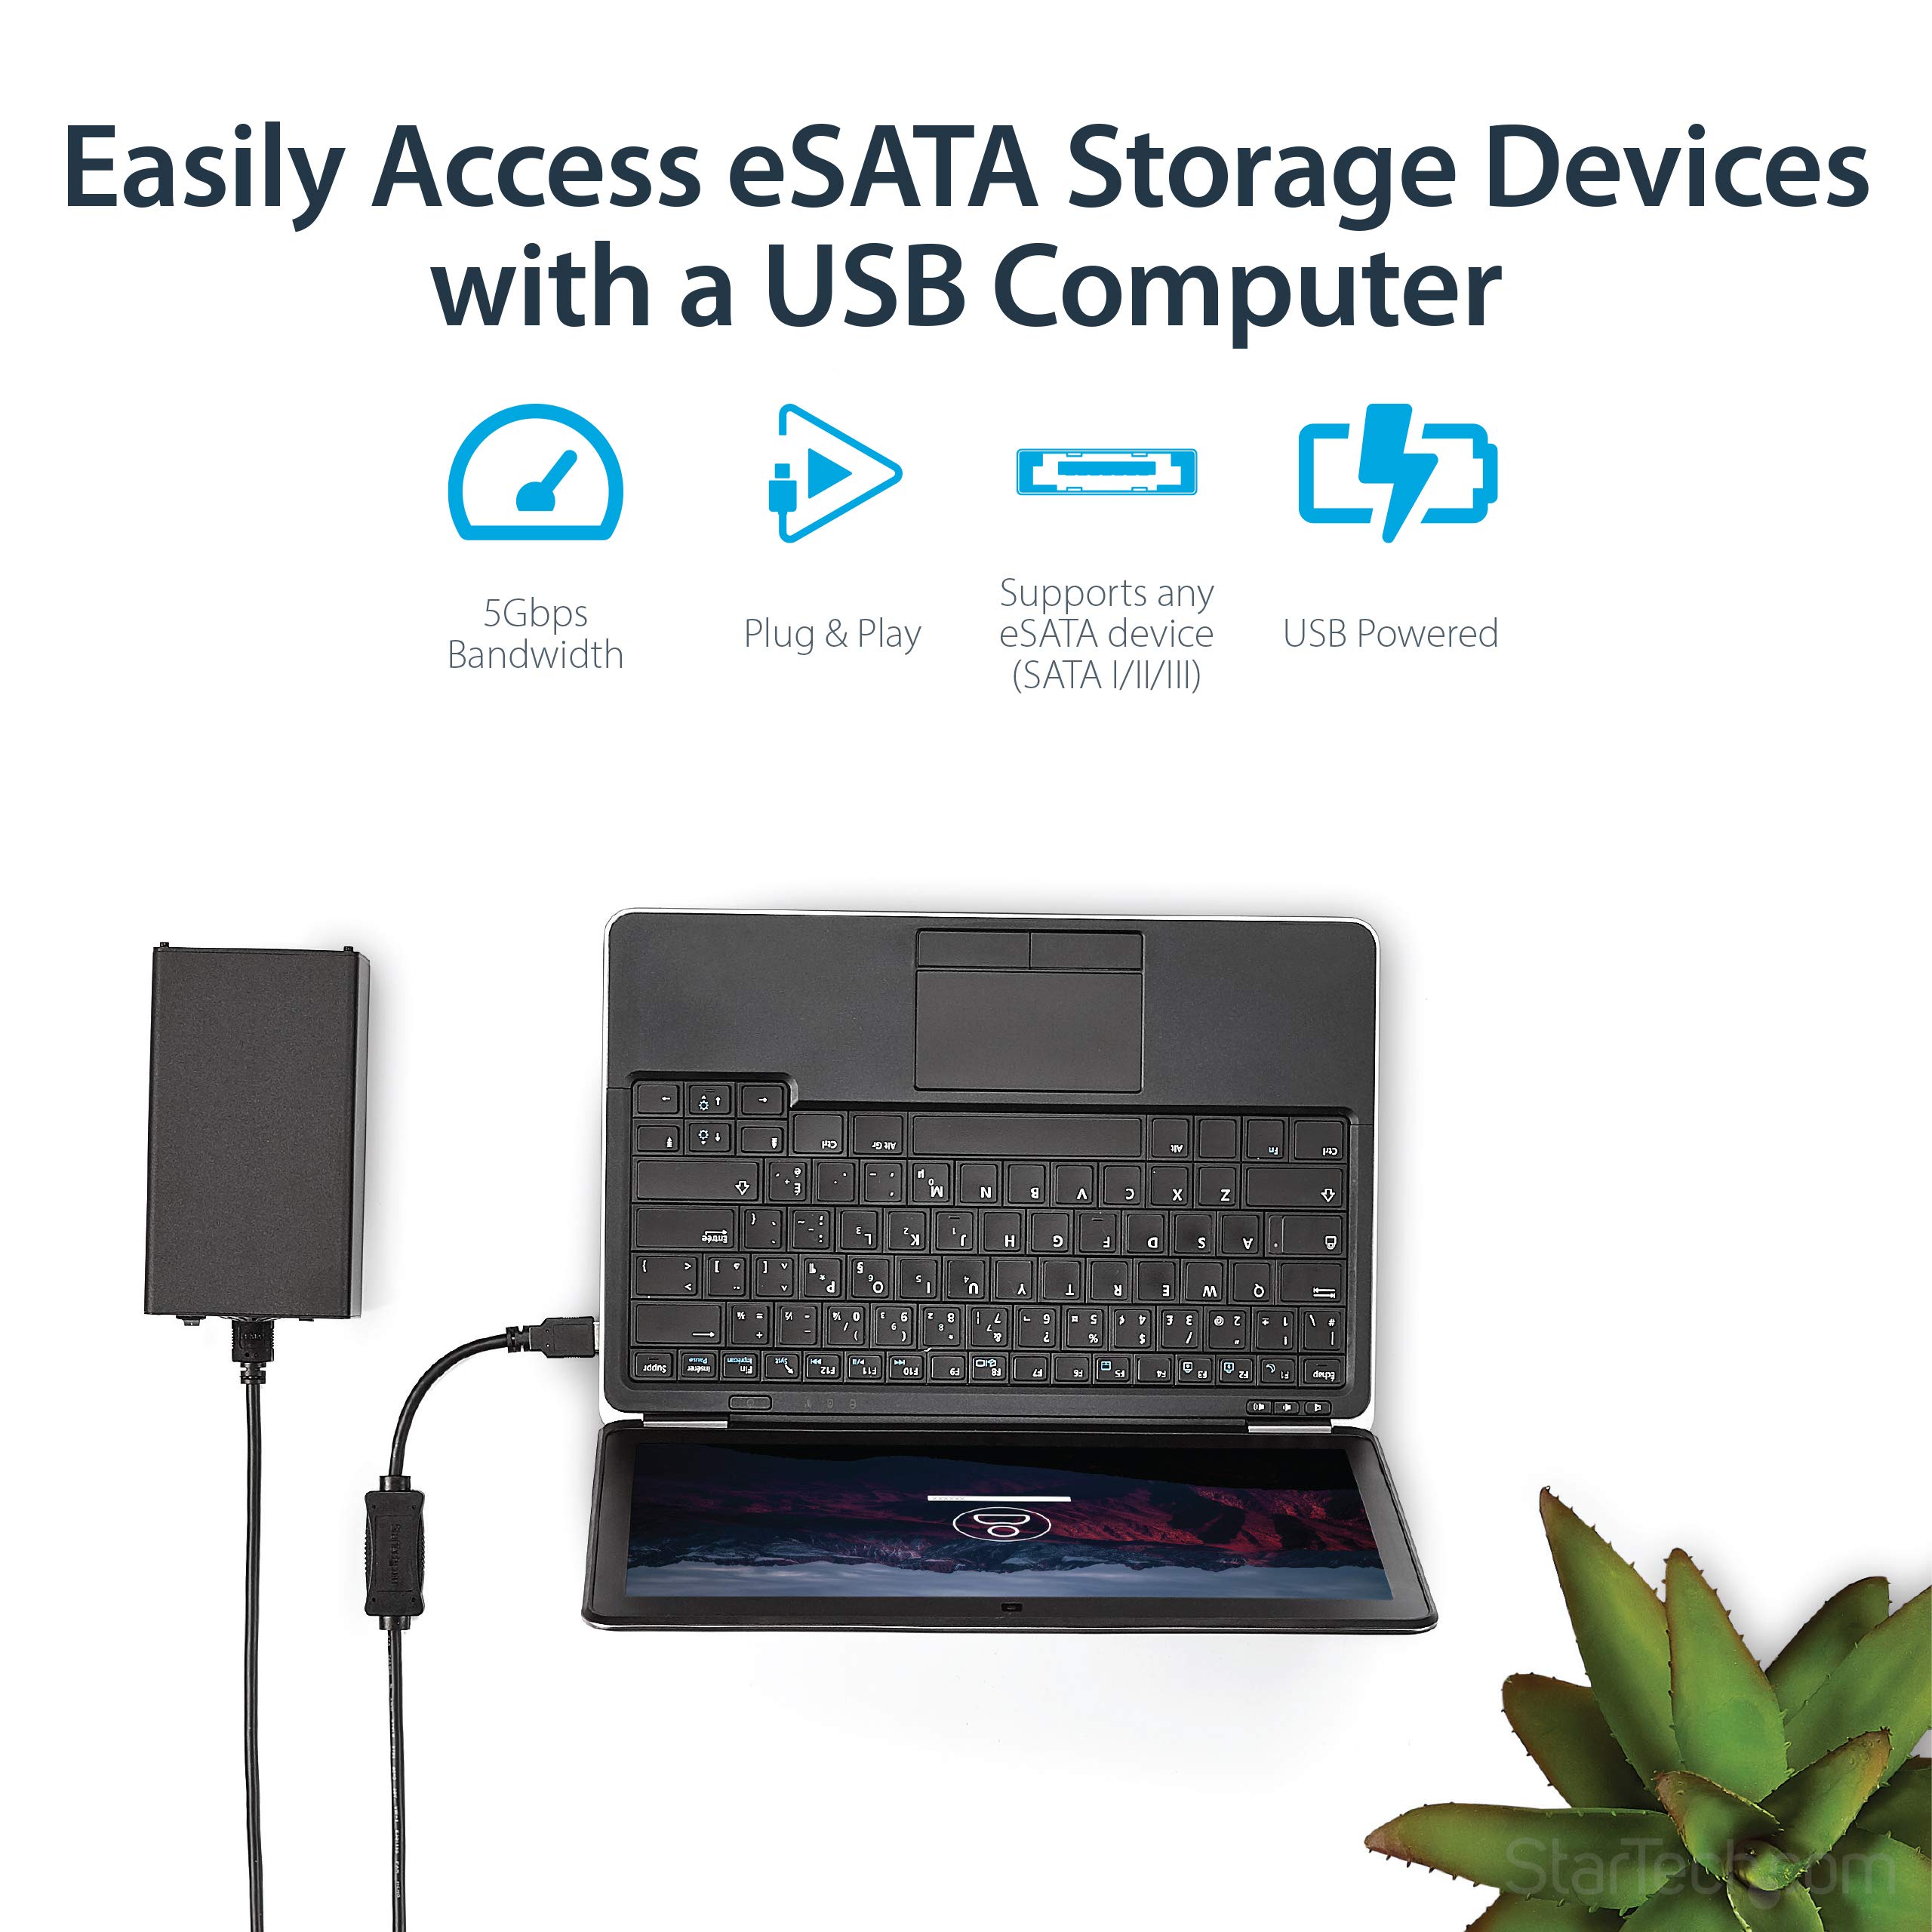 StarTech.com 3 ft USB 3.0 to eSATA Adapter - 6 Gbps USB to HDD/SSD/ODD Converter - Hard Drive to USB Cable (USB3S2ESATA3)